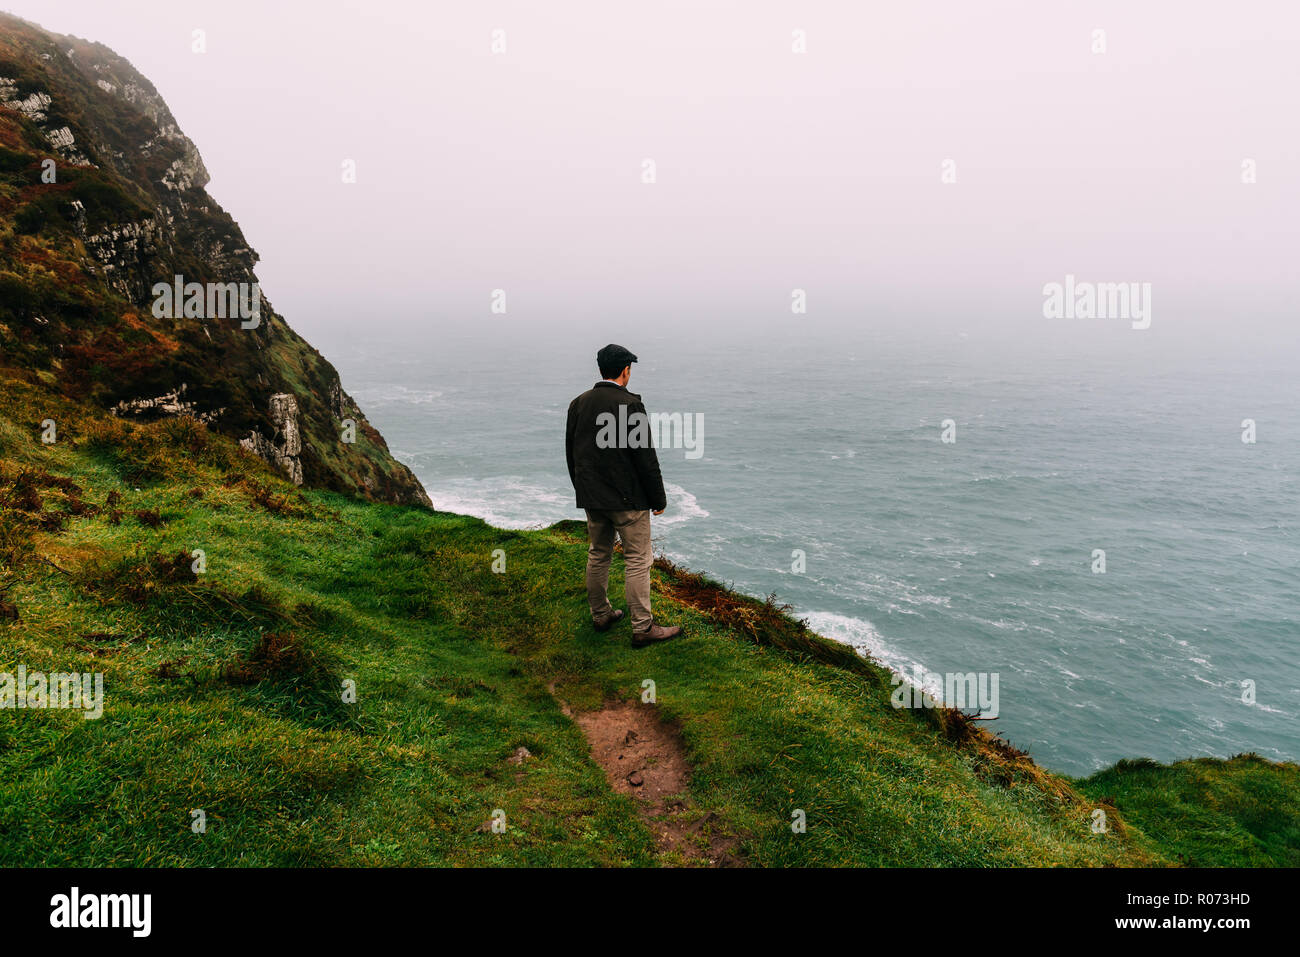 Man wearing cap stands alone in the cliffs of Brandon point in the Wild Atlantic Way of Ireland against the ocean a misty day Stock Photo